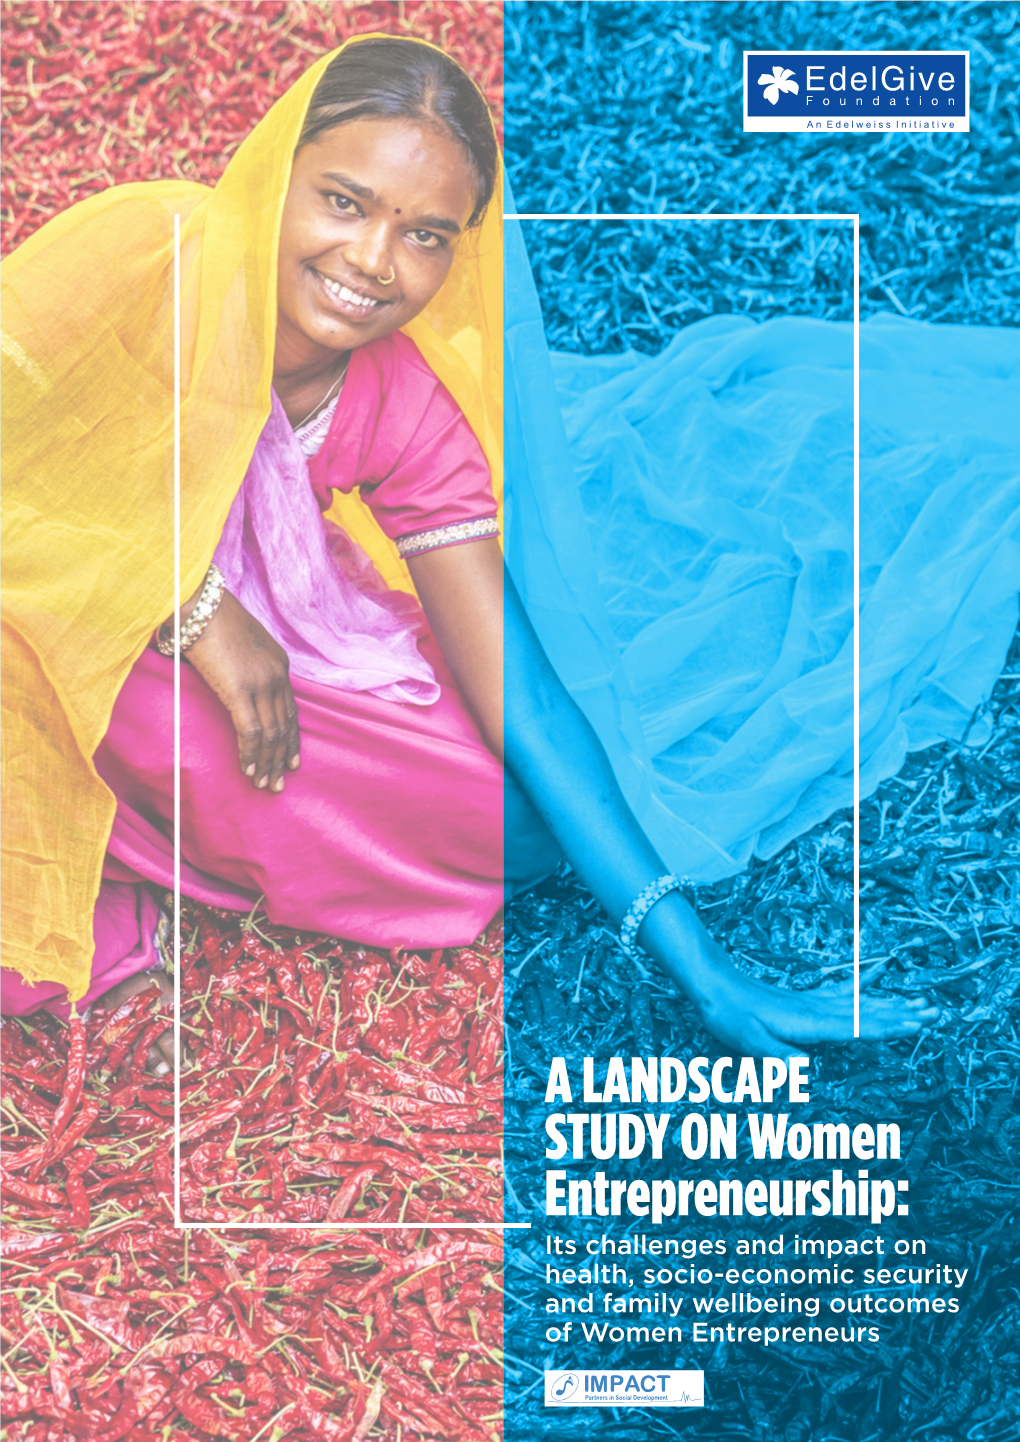 LANDSCAPE STUDY on Women Entrepreneurship: Its Challenges and Impact on Health, Socio-Economic Security and Family Wellbeing Outcomes of Women Entrepreneurs